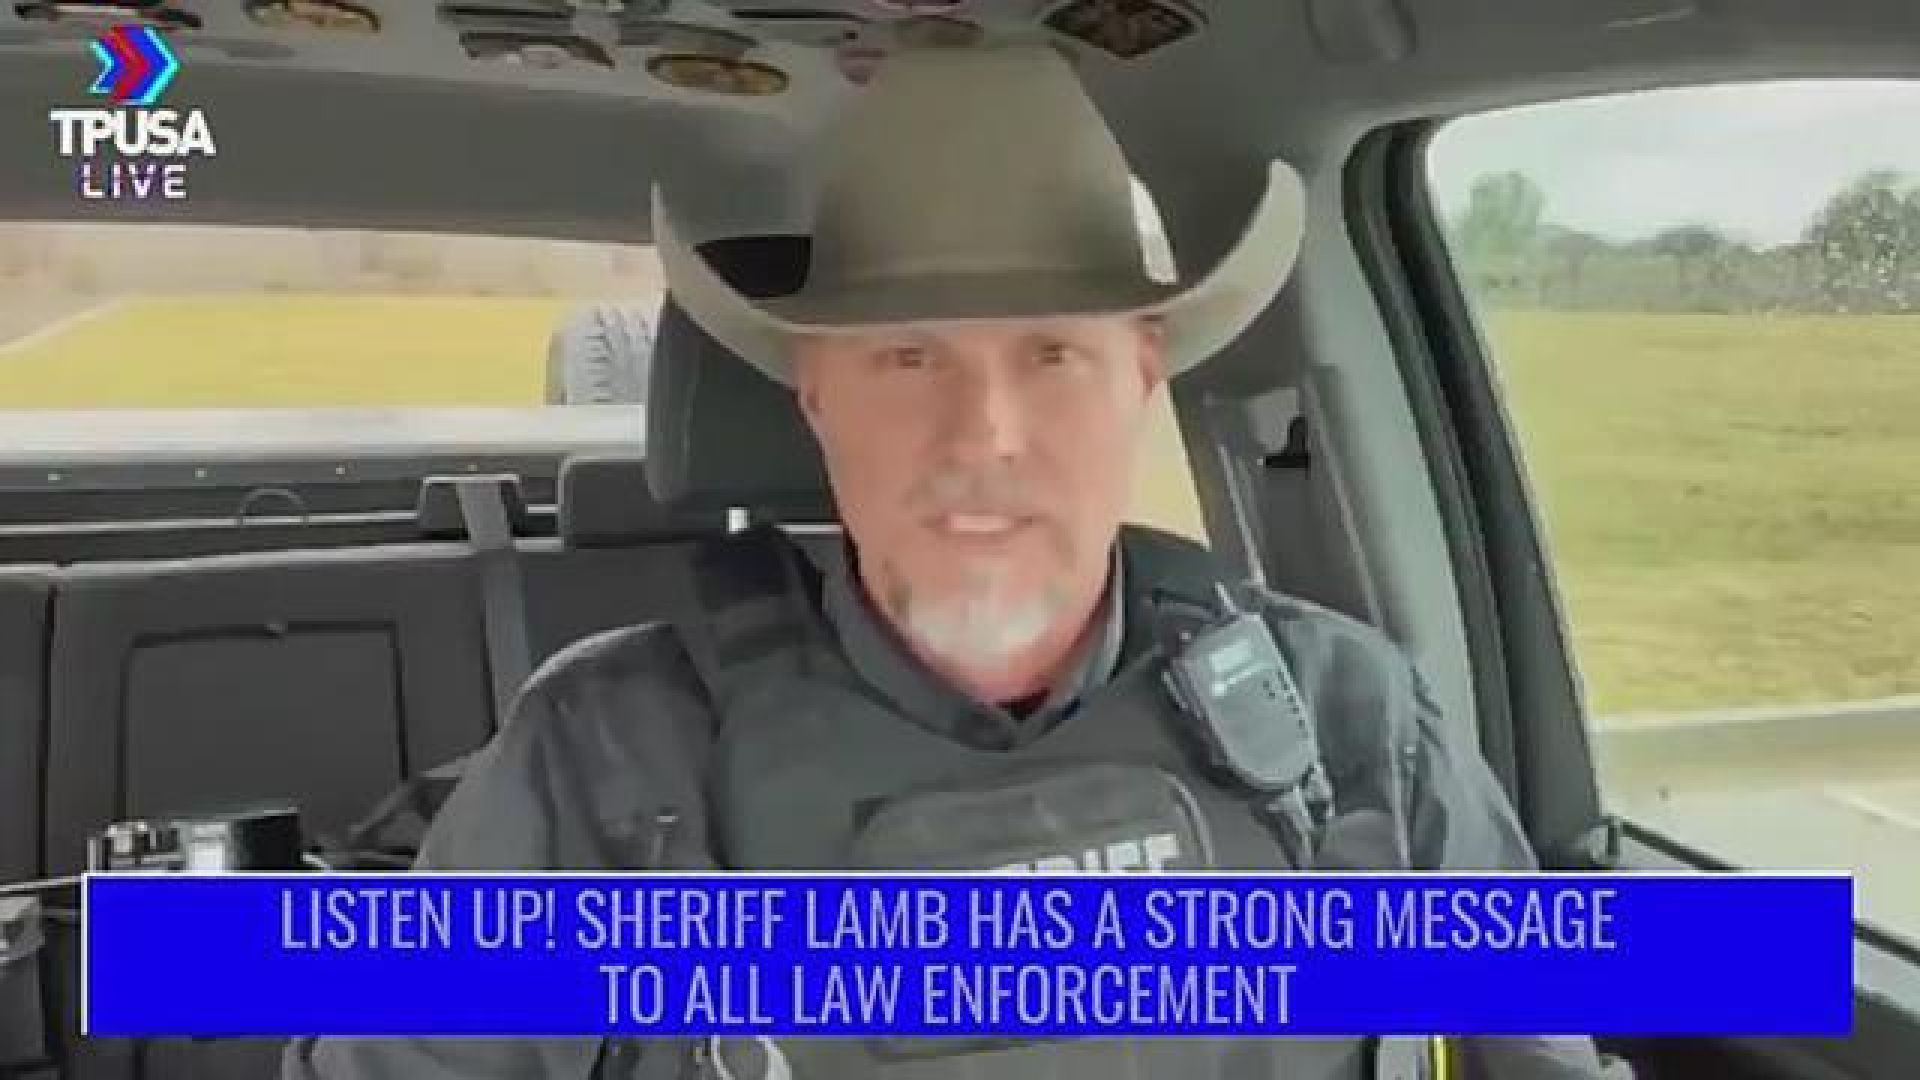 A SHERIFF IN ARIZONA HAS A STRONG MESSAGE FOR THOSE IN LAW ENFORCEMENT